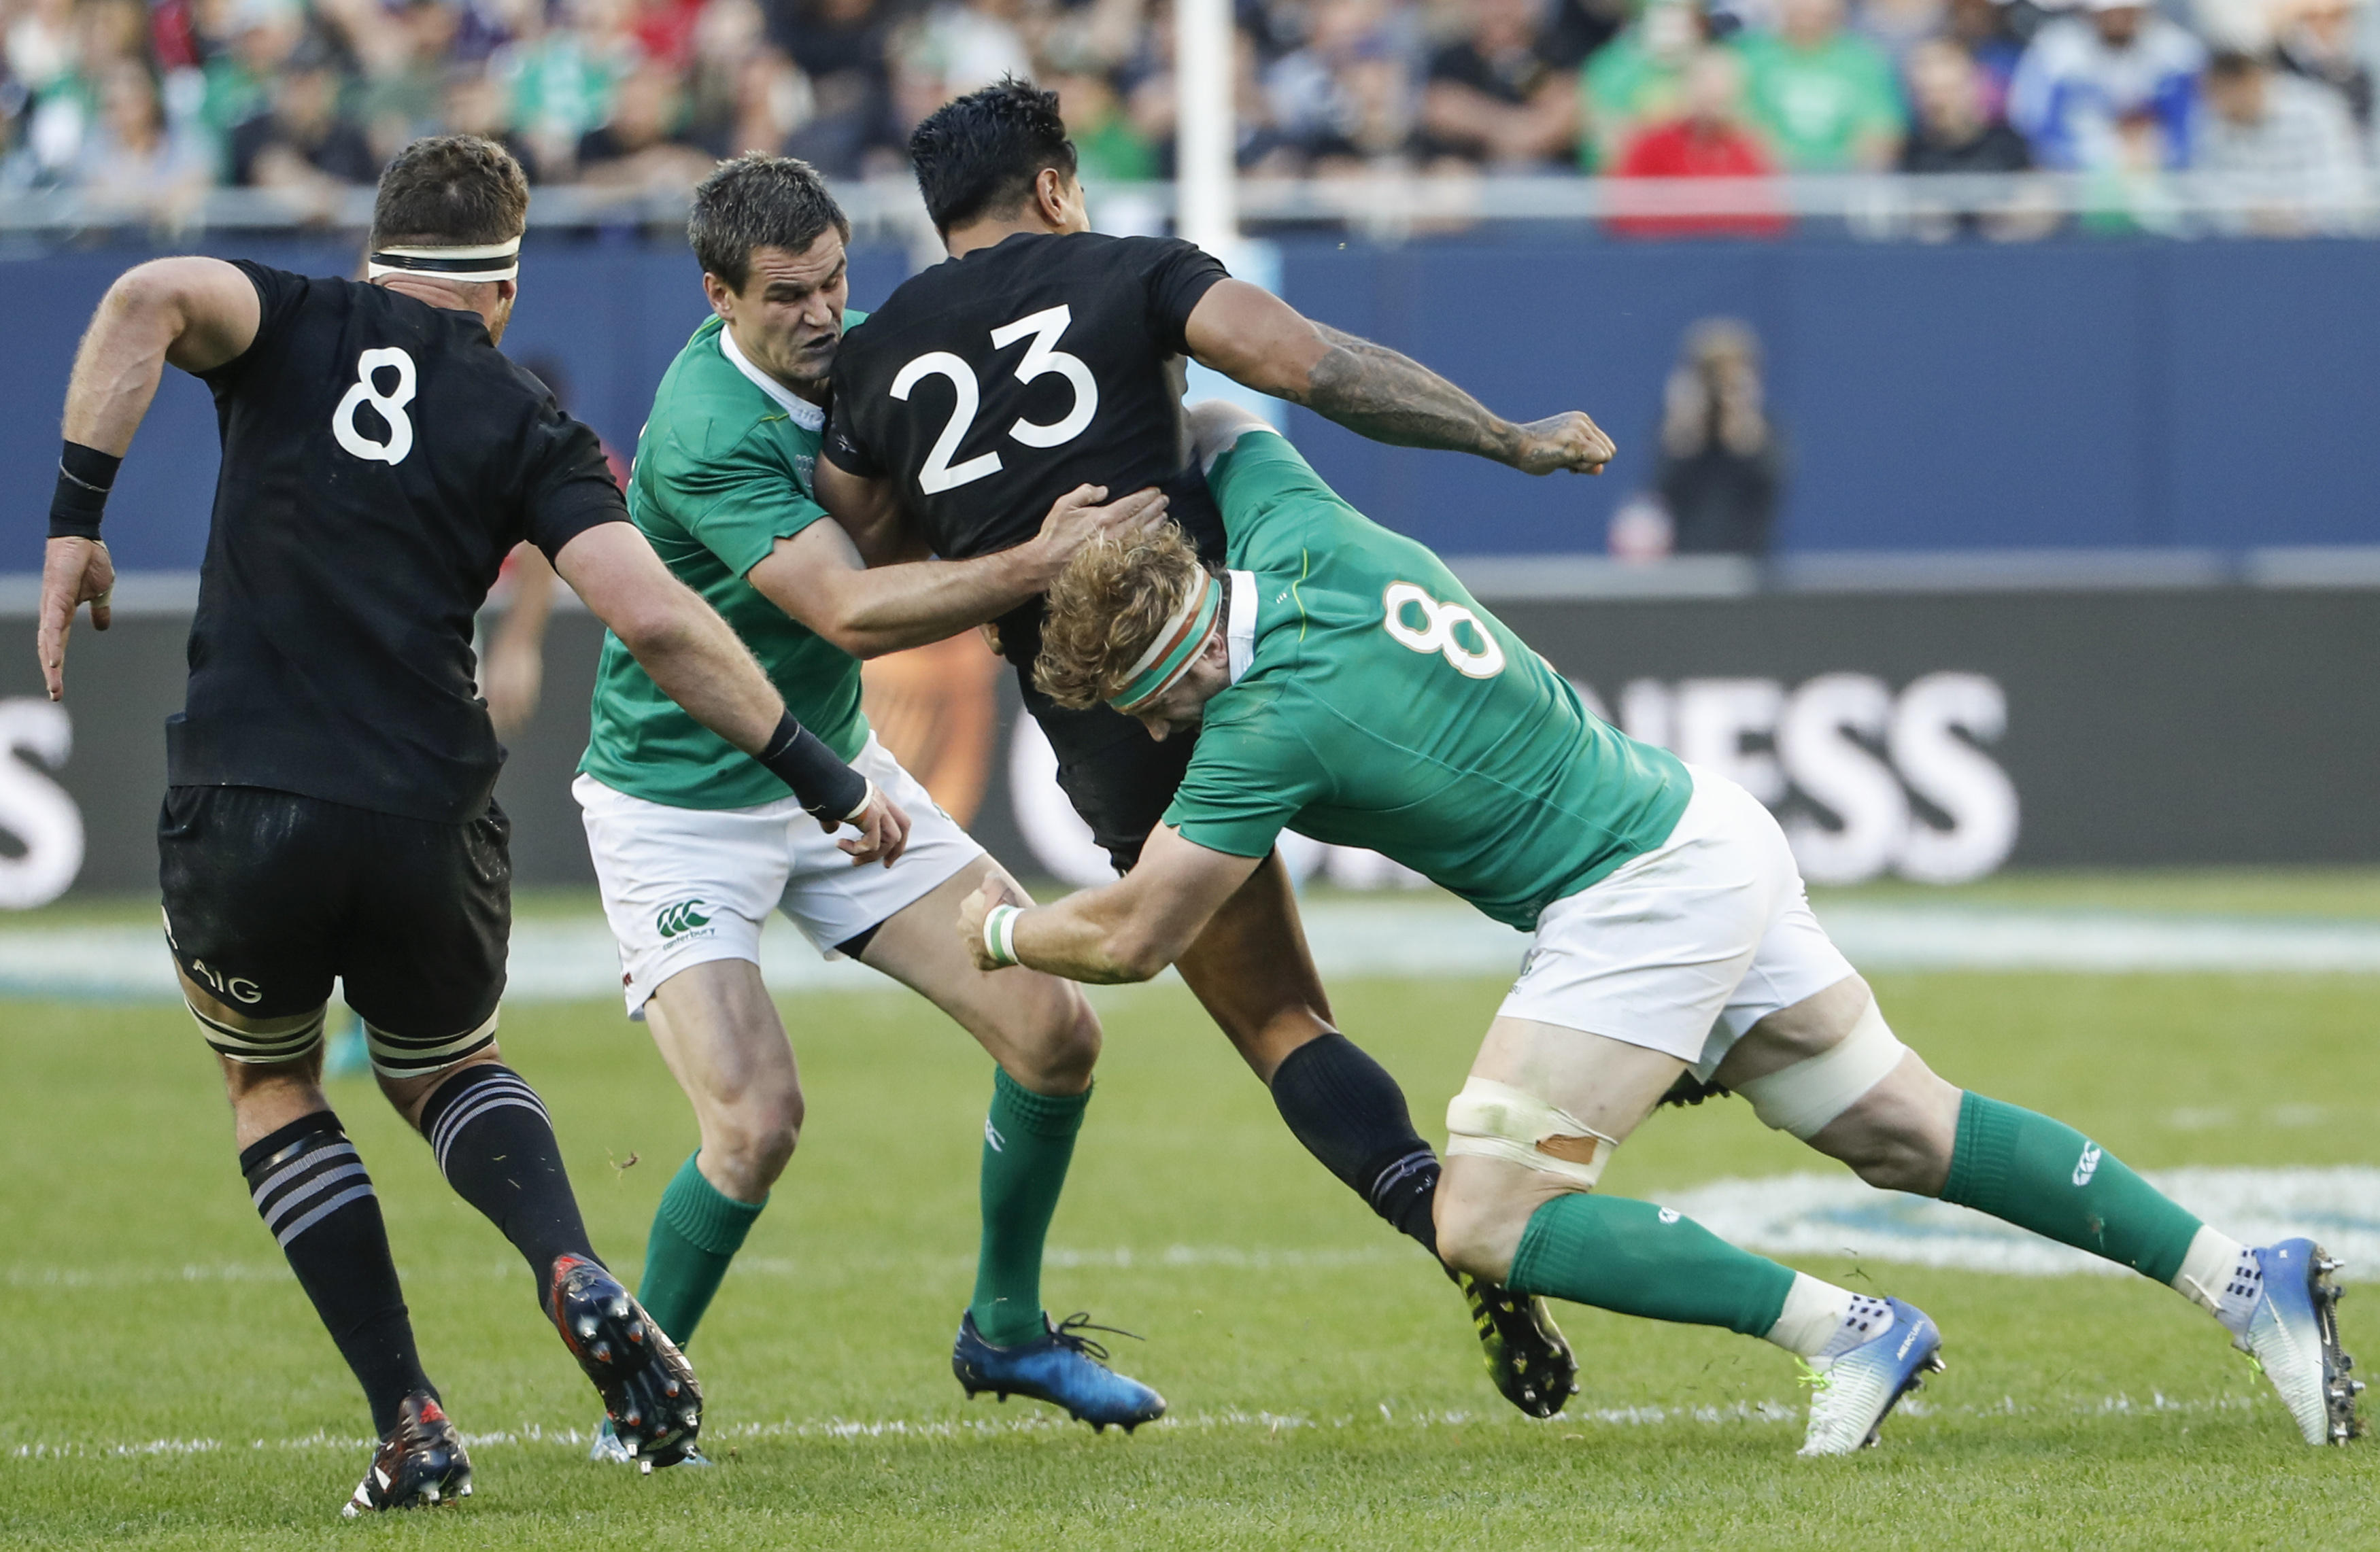 Ireland beats New Zealand at rugby for first time in 111 years CBS News